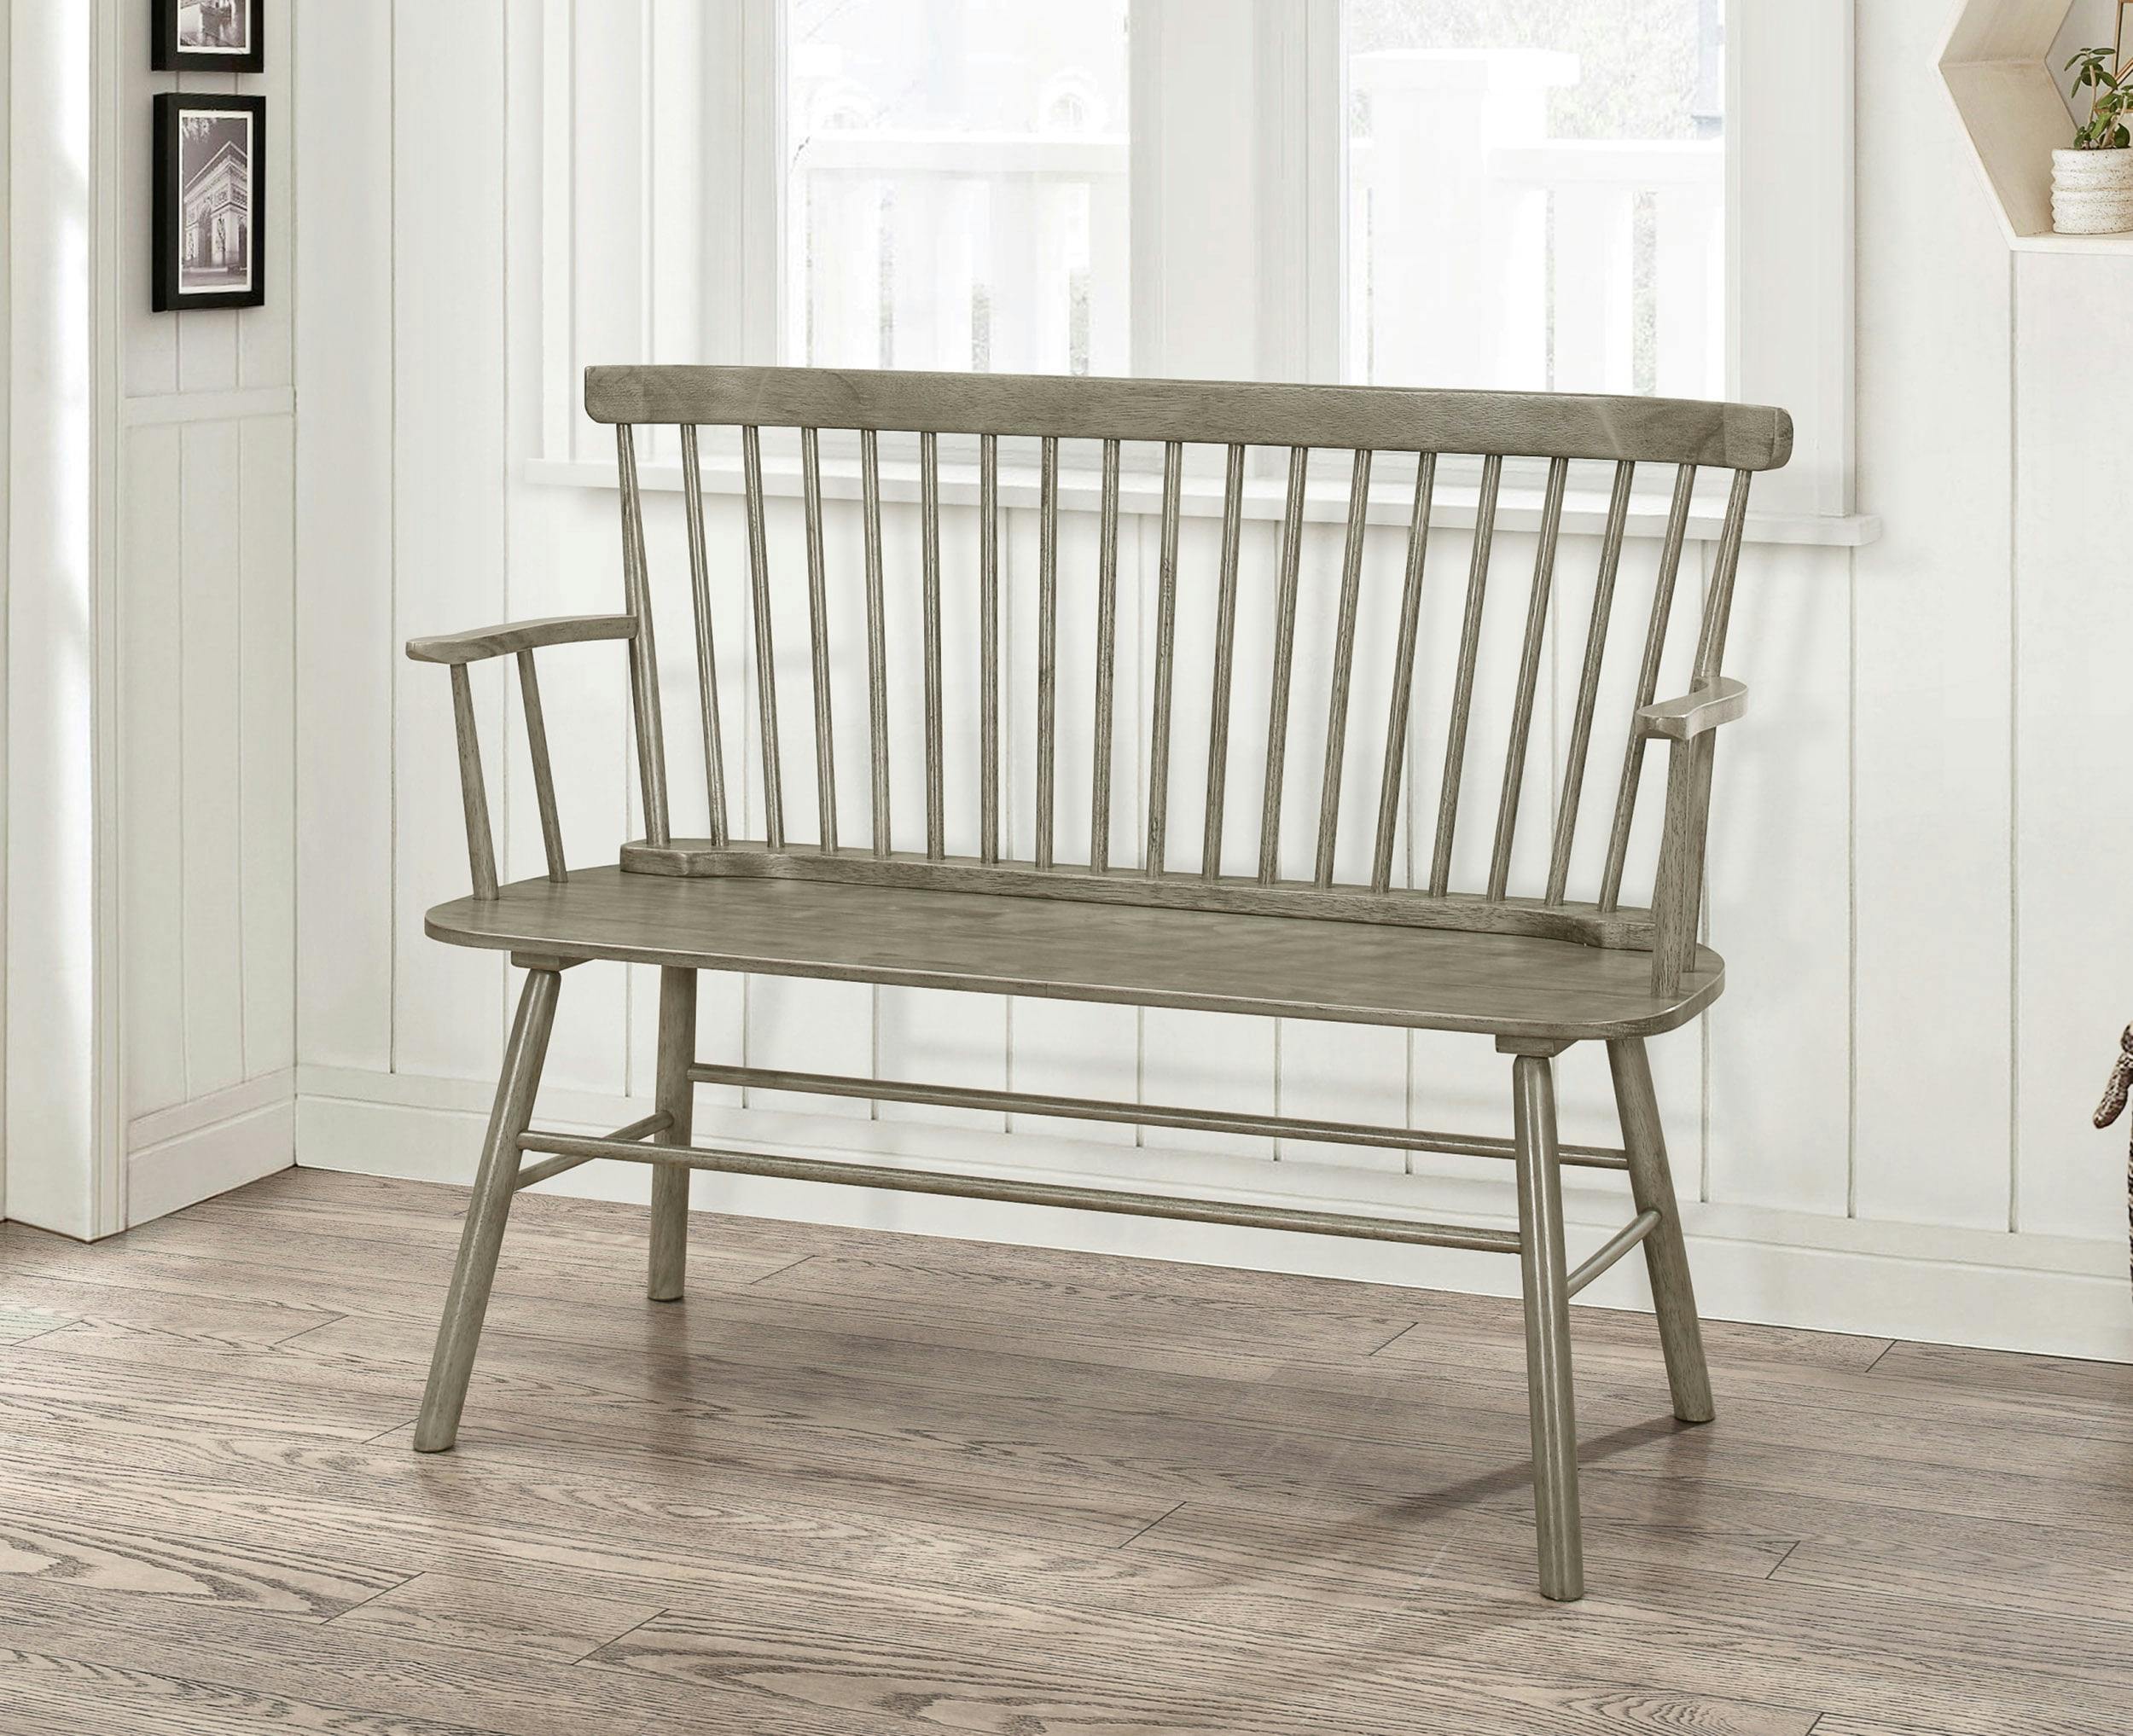 Farmhouse Natural Wood Spindleback Bench with Armrests